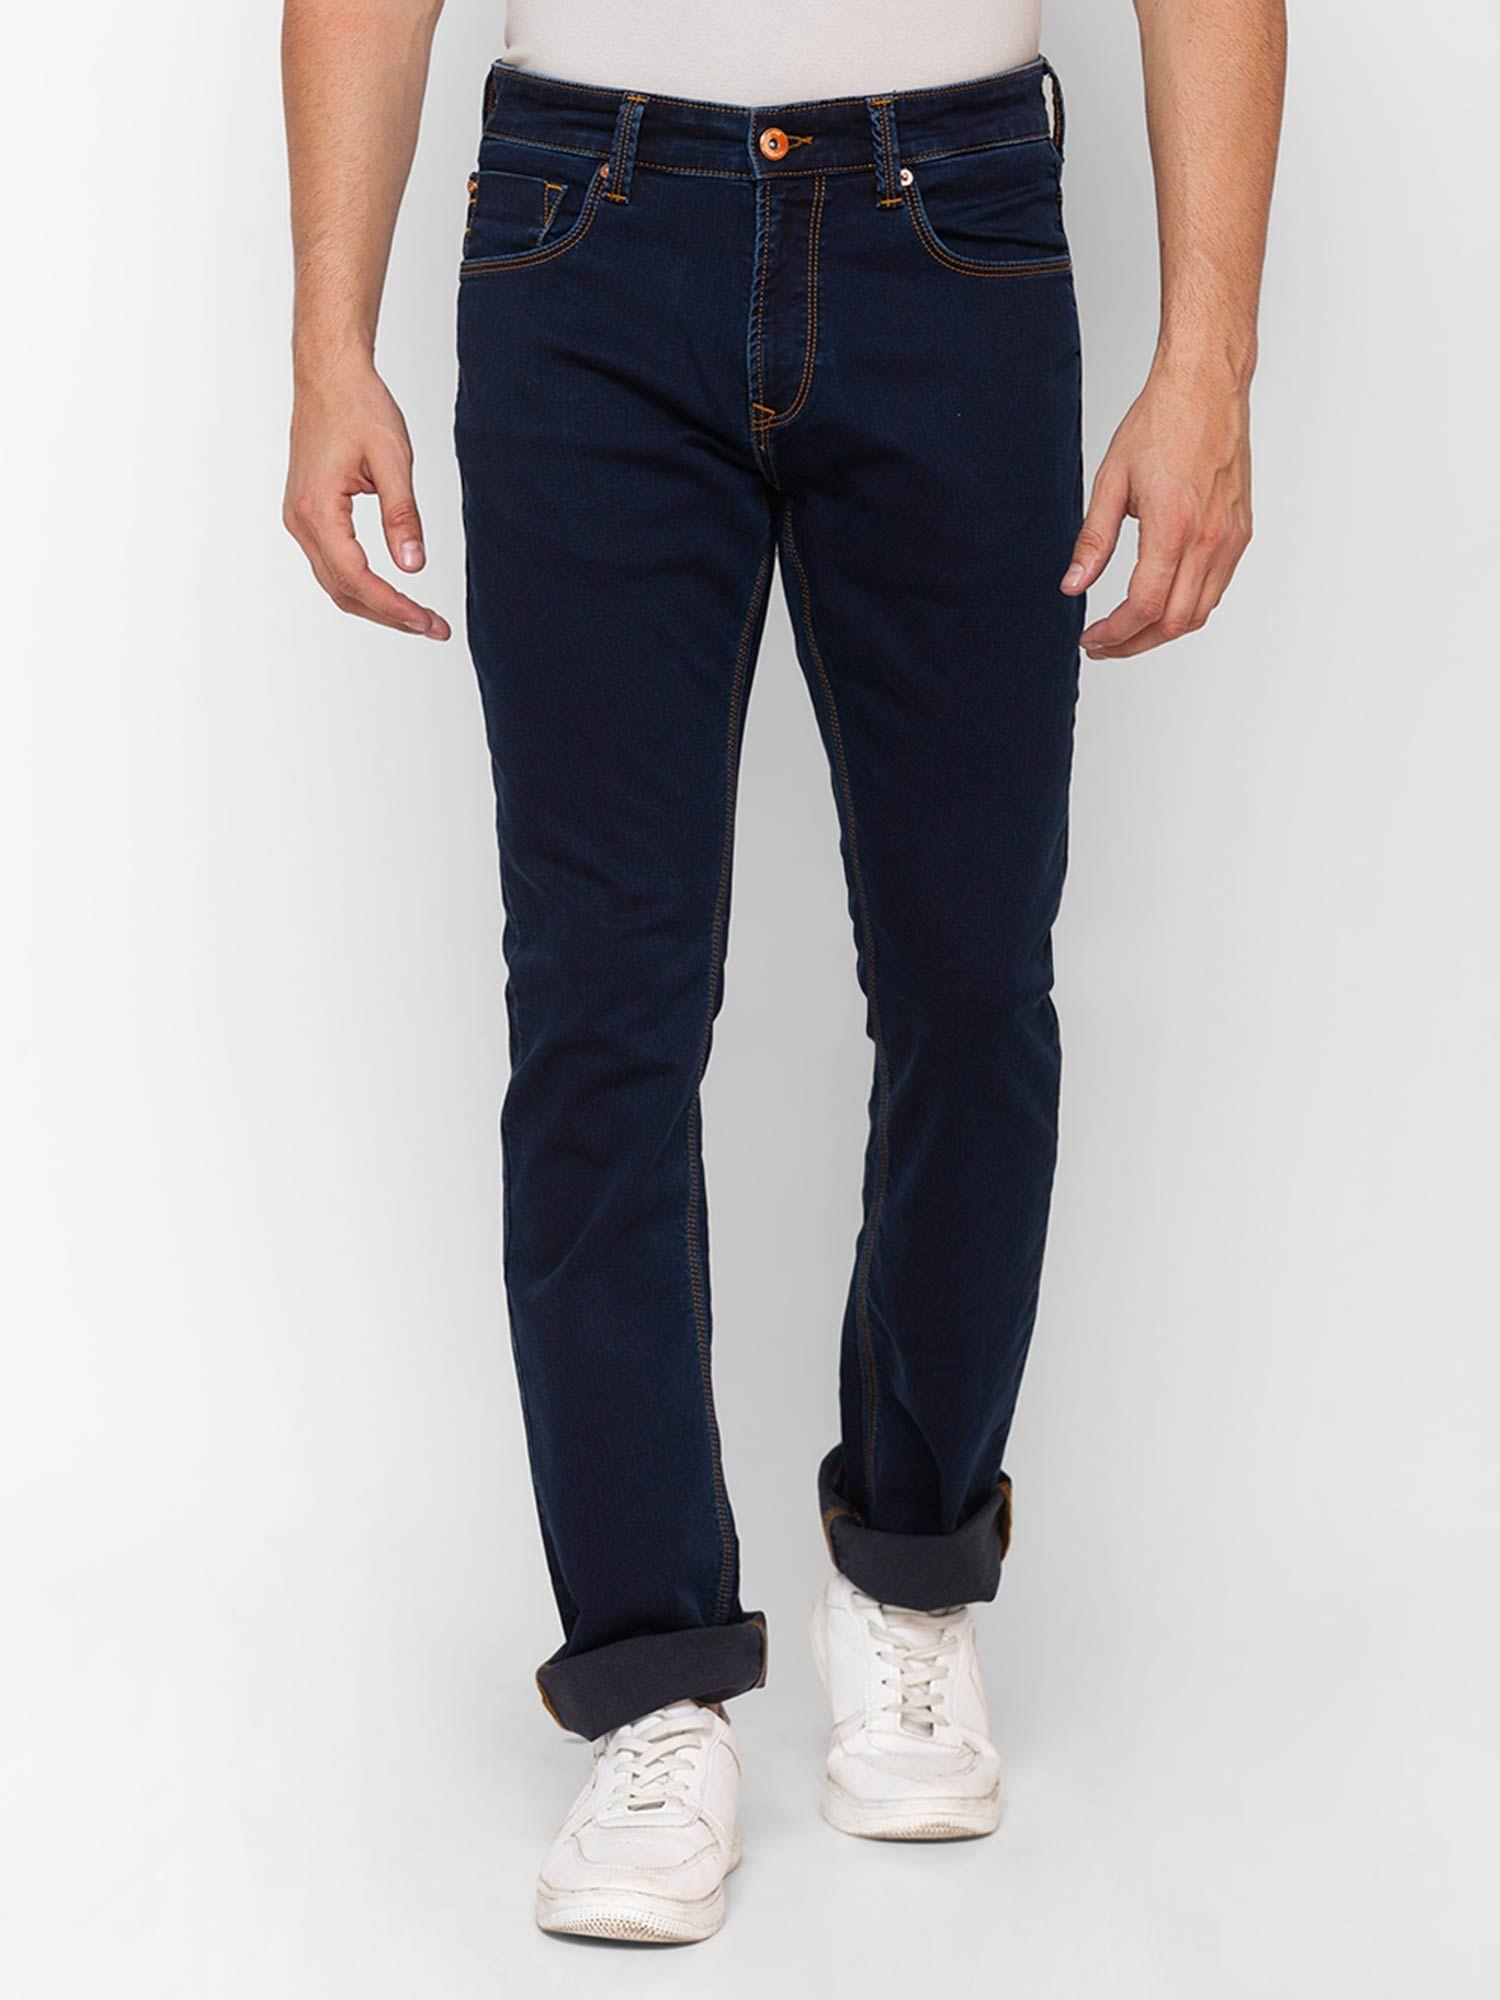 raw-blue-cotton-comfort-fit-straight-length-jeans-for-men-(ricardo)